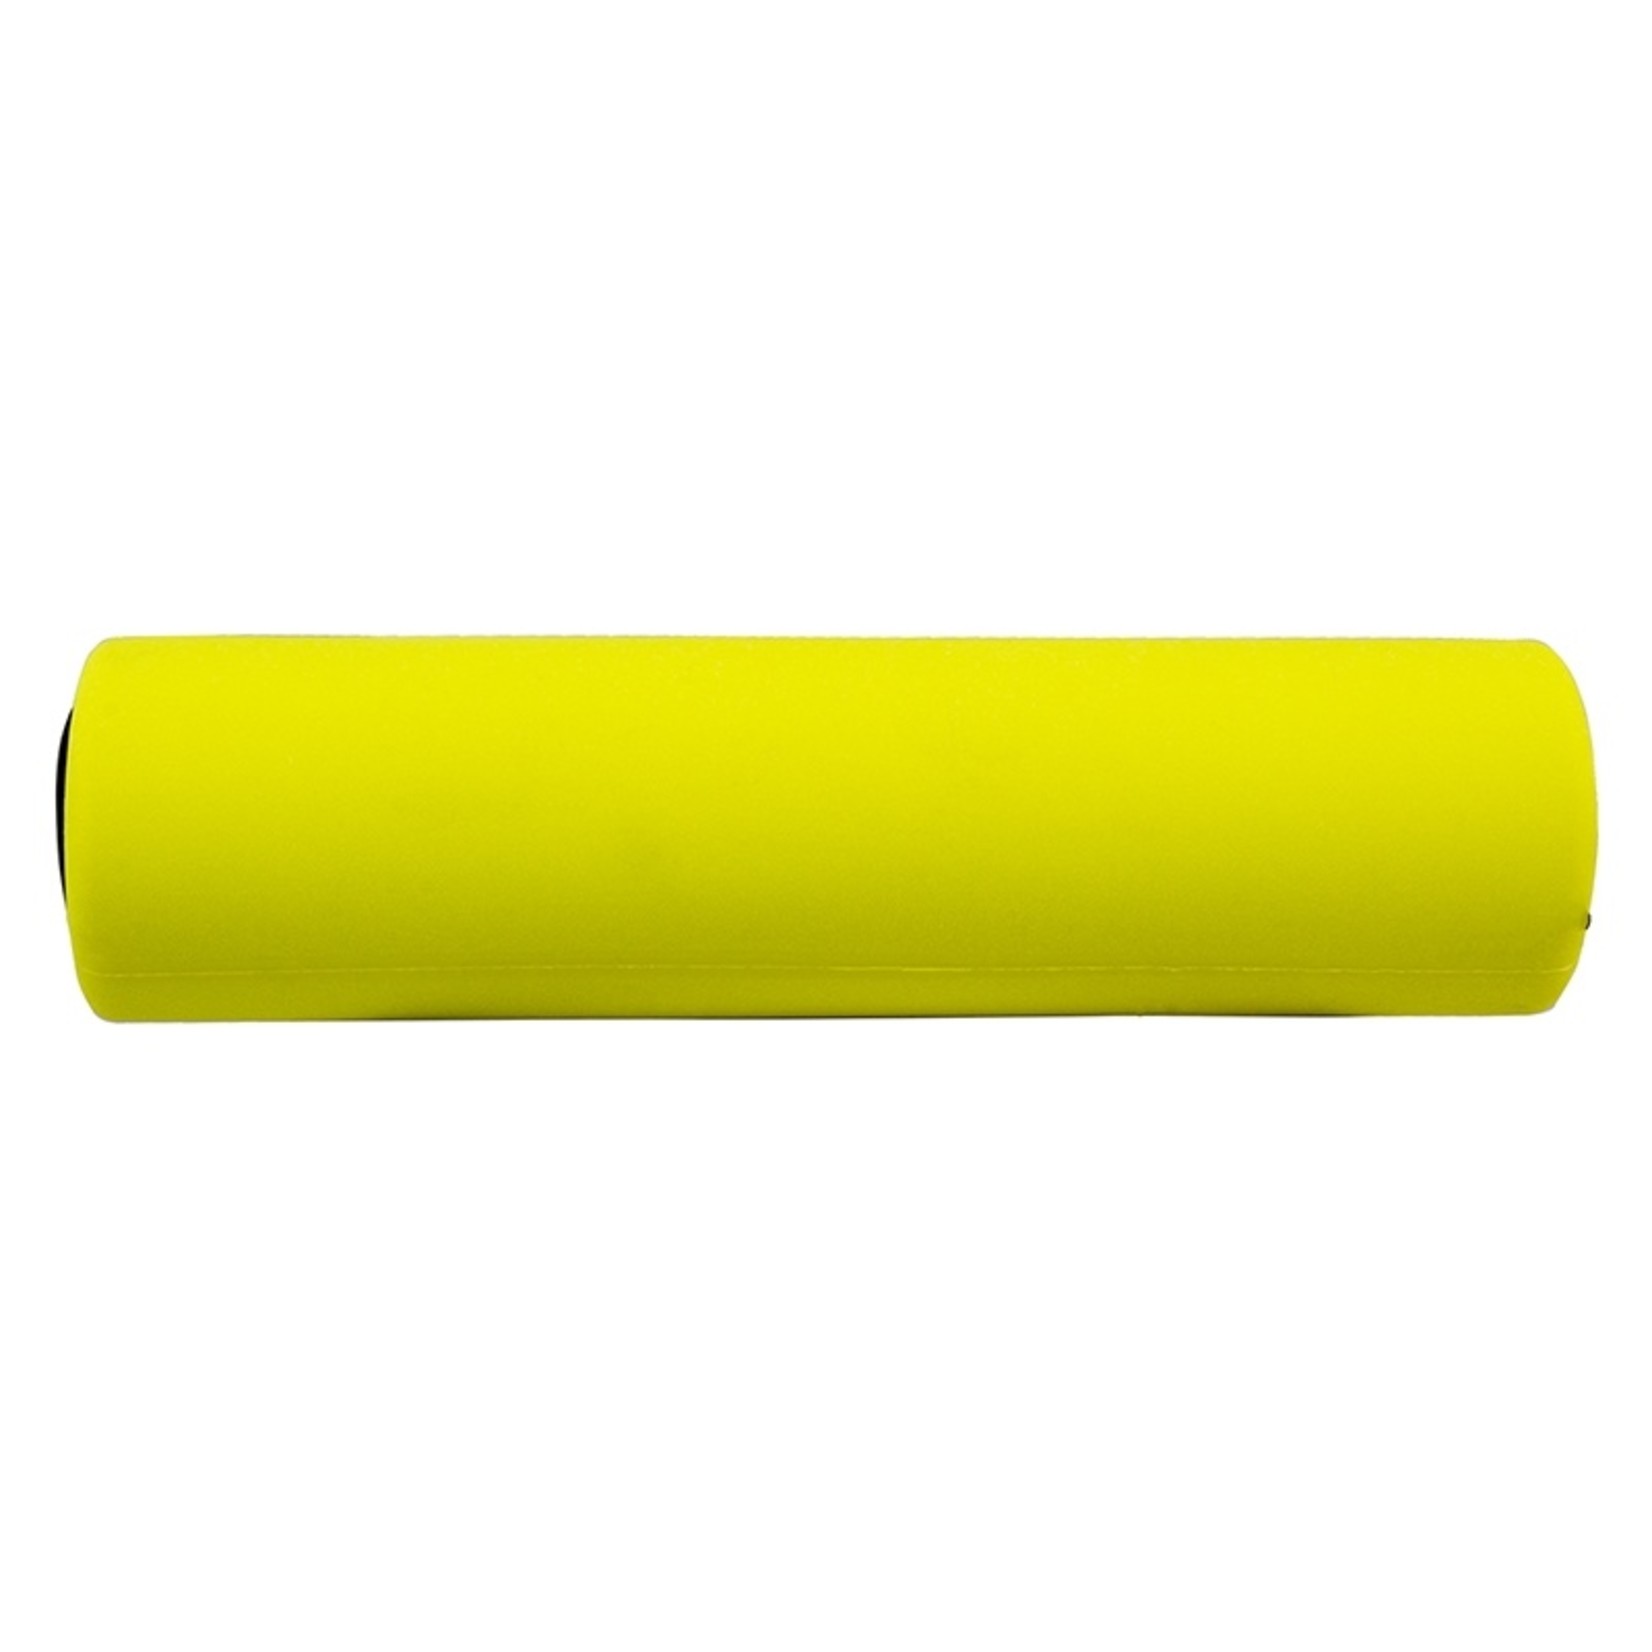 Black Ops Tactile Silicone Grips 128mm Yellow